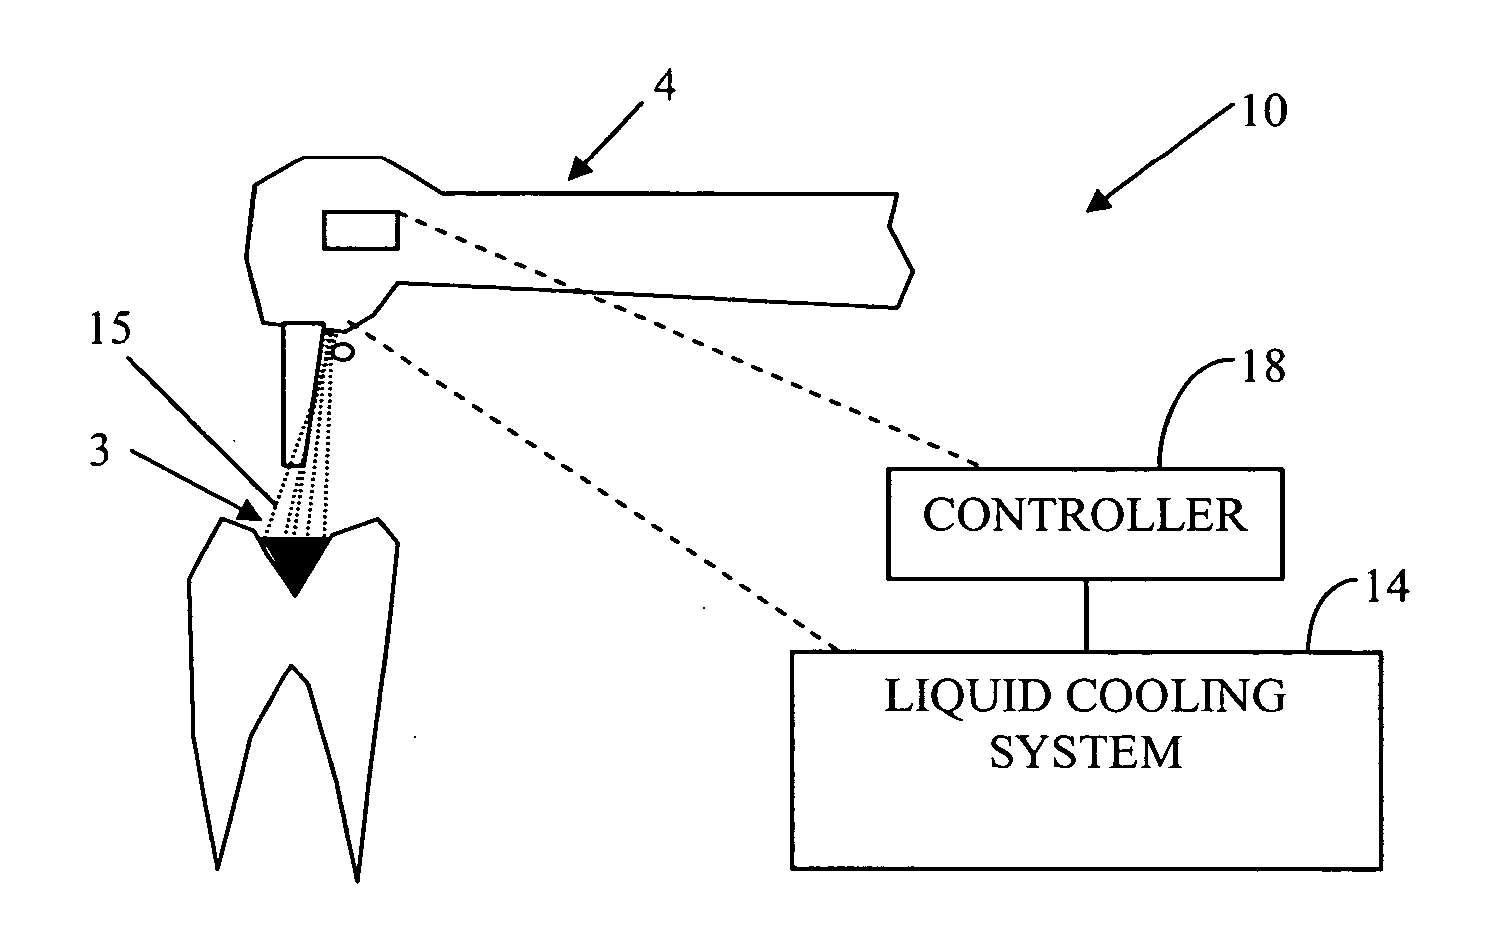 Apparatus and method for treating dental tissue